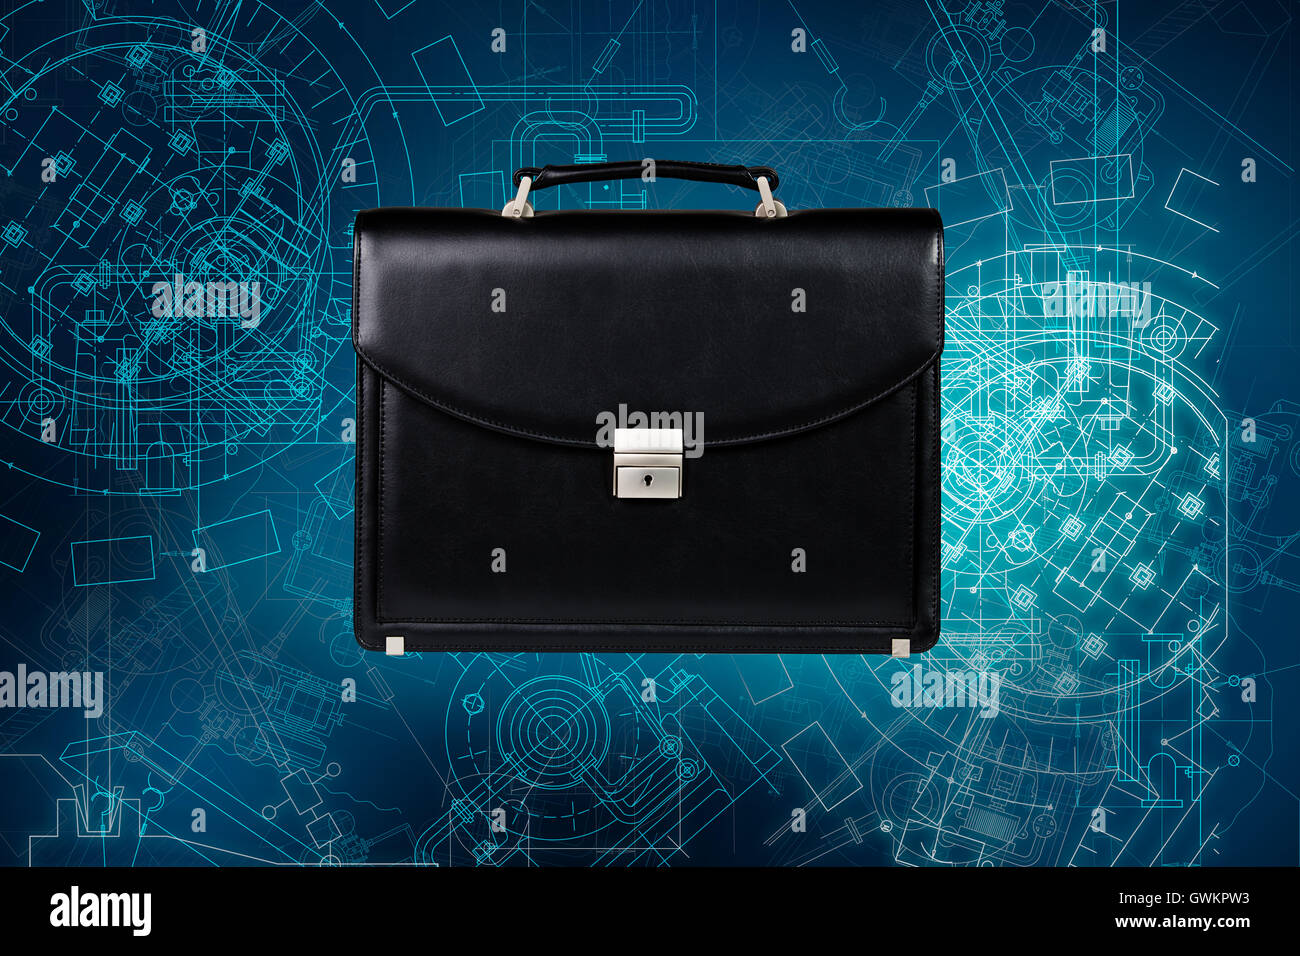 Black business briefcase over architecture blueprint background Stock Photo